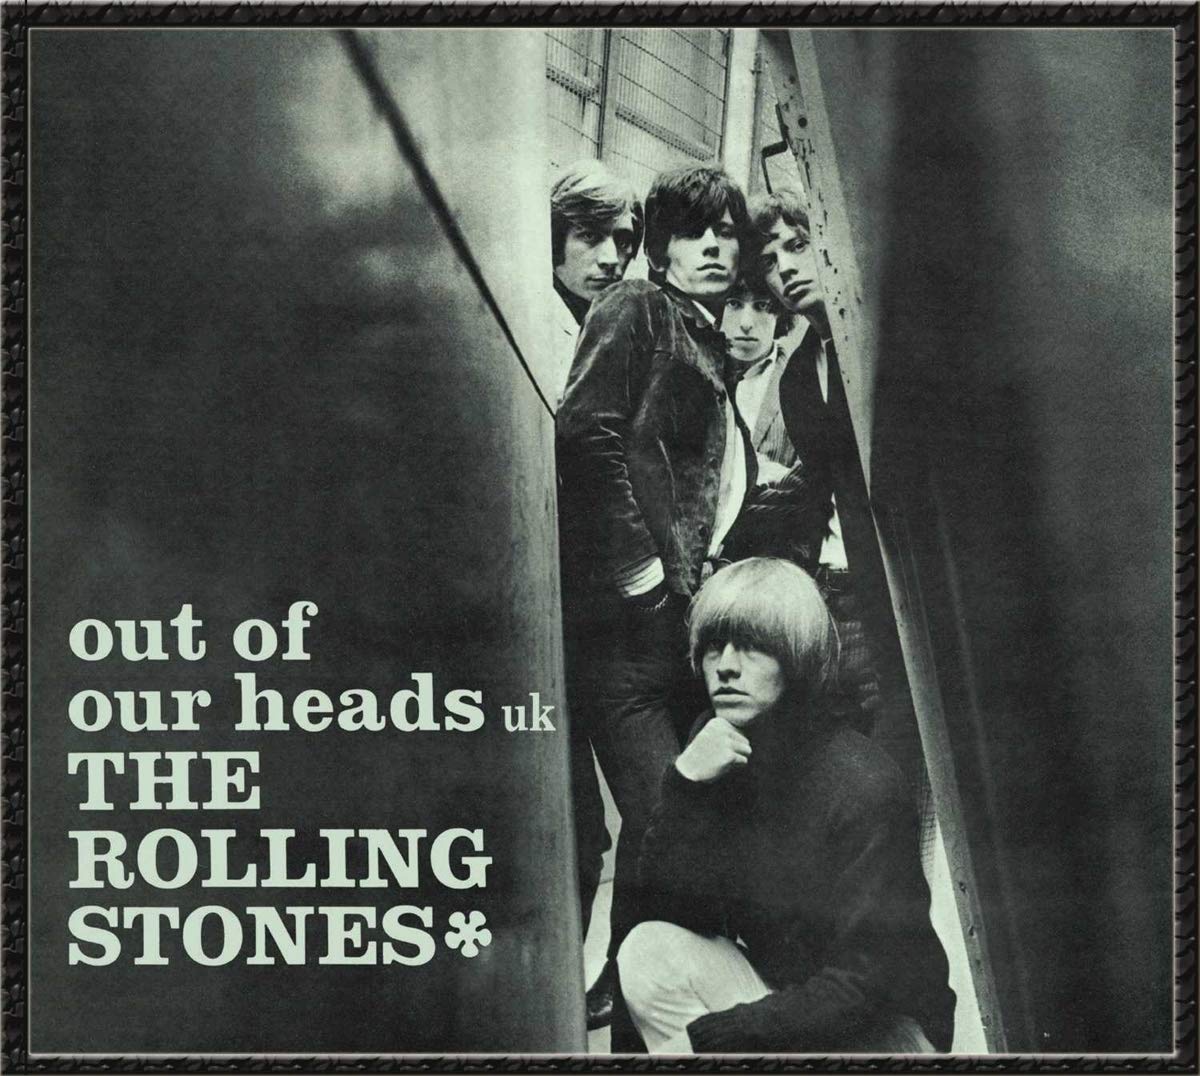 ROLLING STONES, THE – Out Of Our Heads